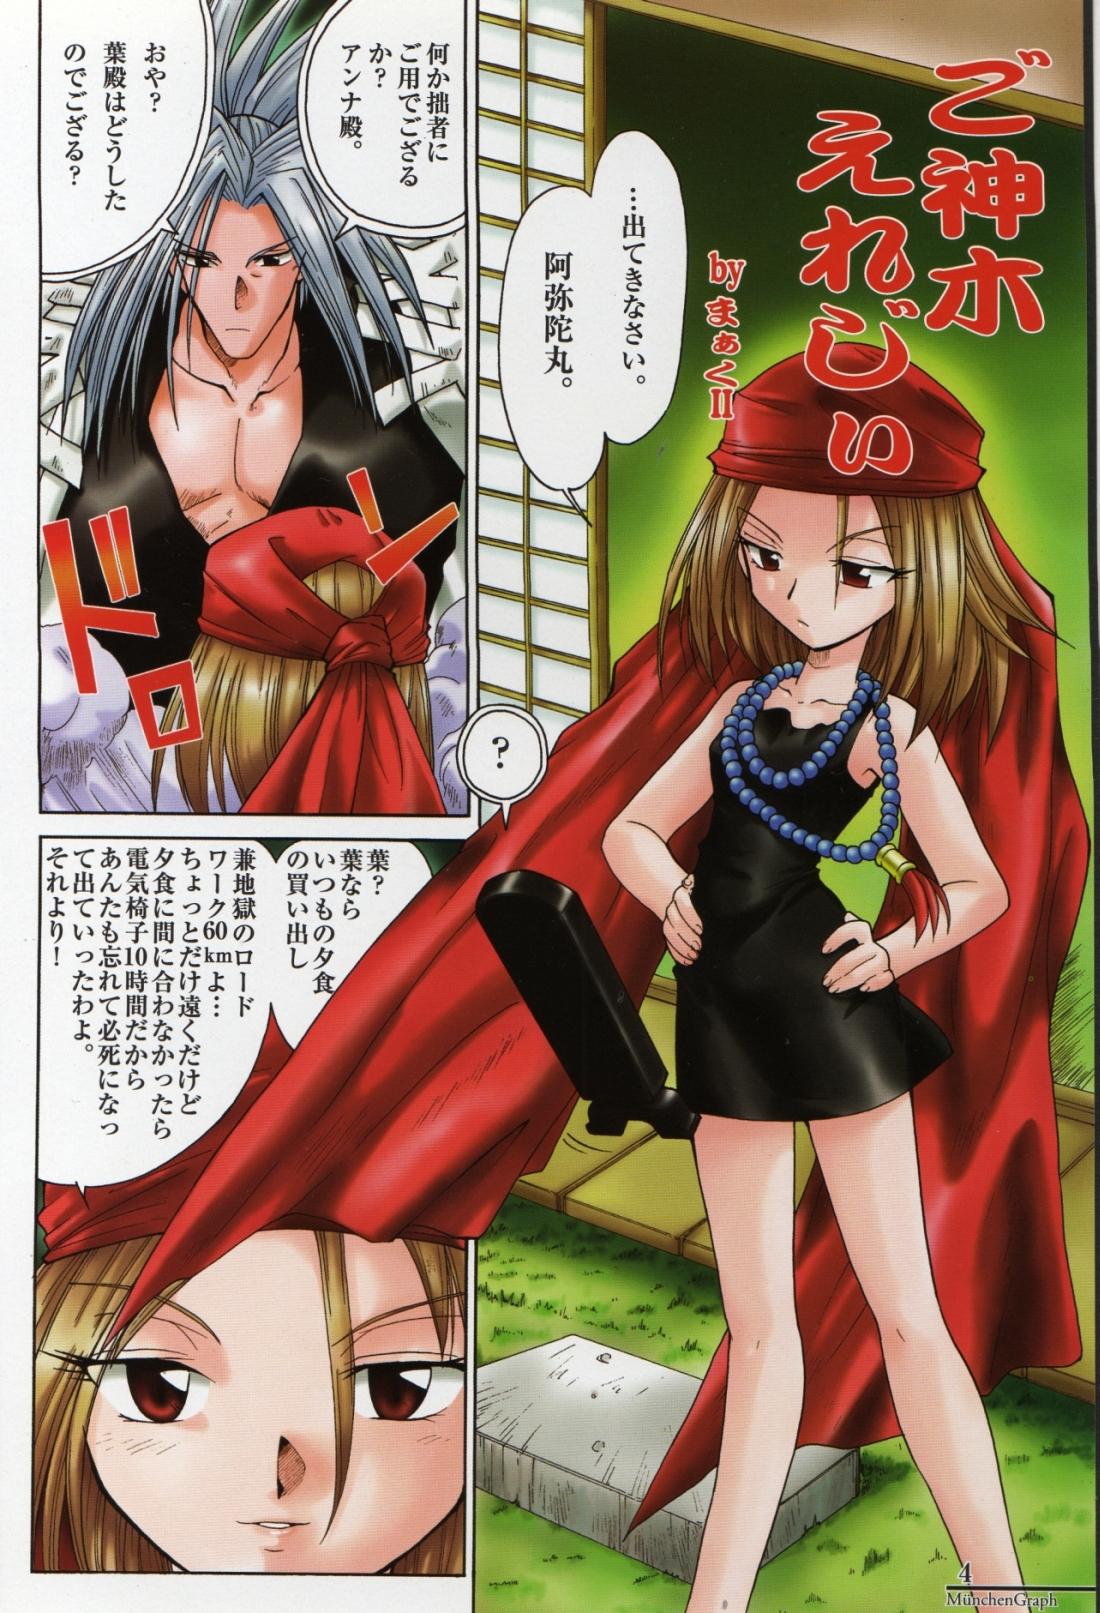 Ginger Munchen Graph Volume 10 - Shaman king Gay Trimmed - Page 4